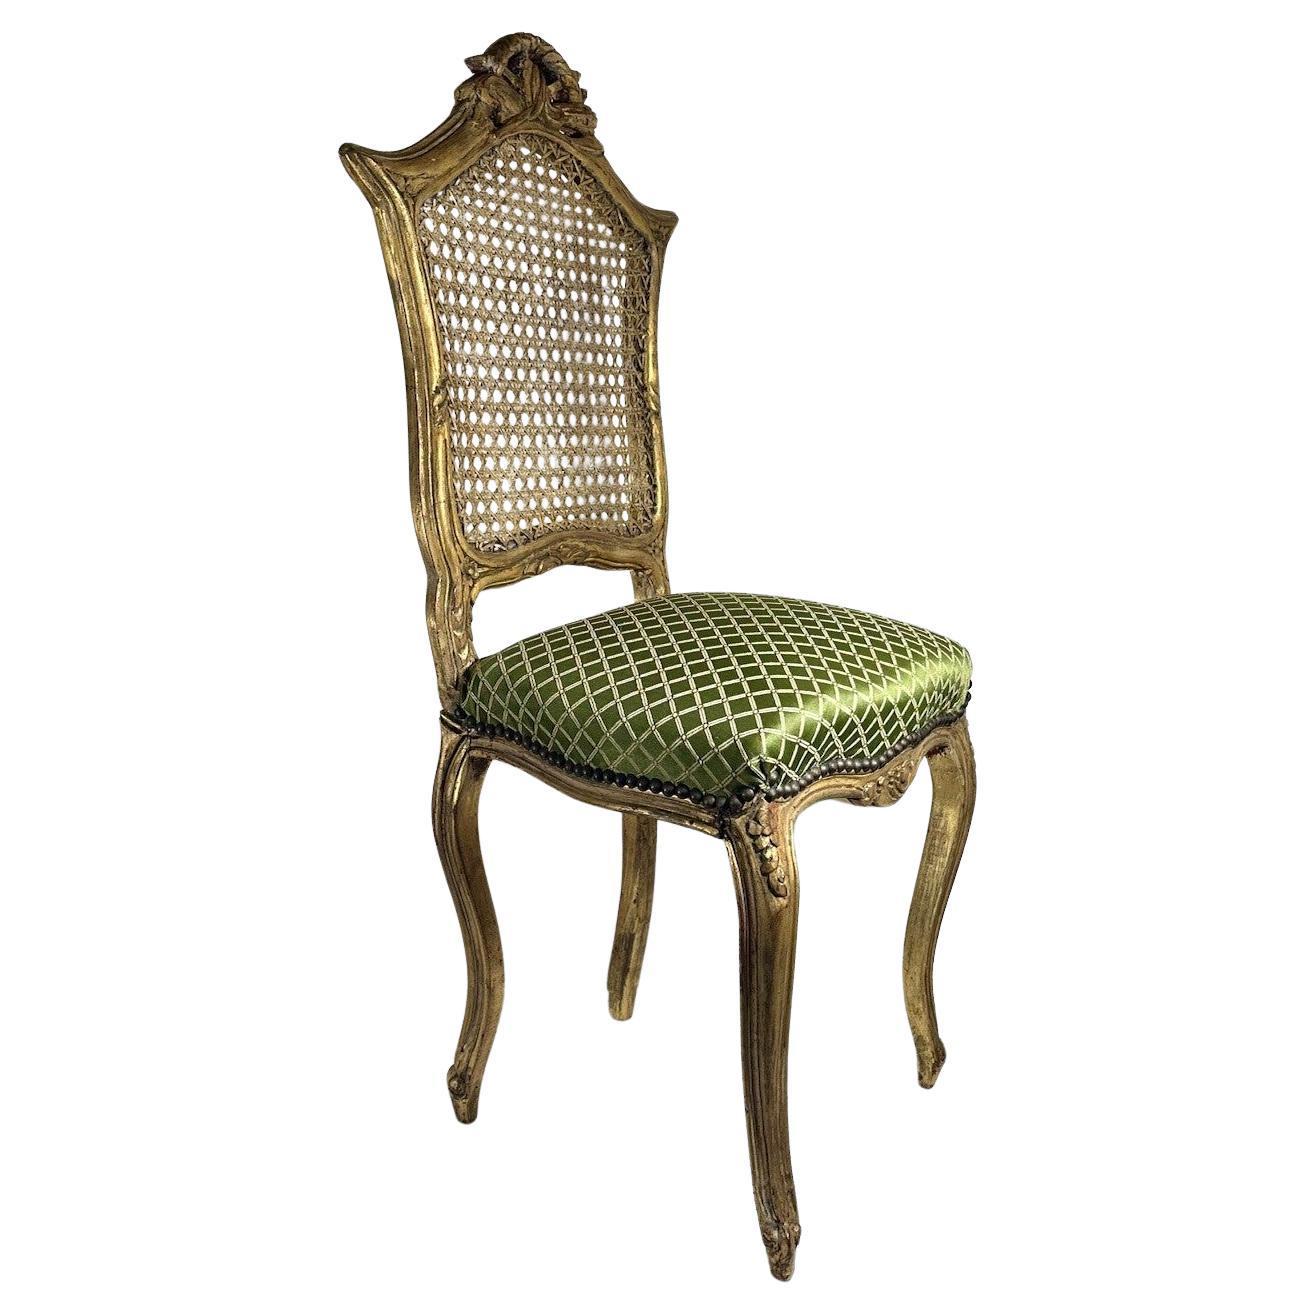 Rococo Style Giltwood Cane Chair with Upholstered Seat, Side Chair.

This petite chair raised on cabriole legs features a caned backrest that is complimented by an upholstered seat in green with gold lattice pattern. Condition is very good.  Wear